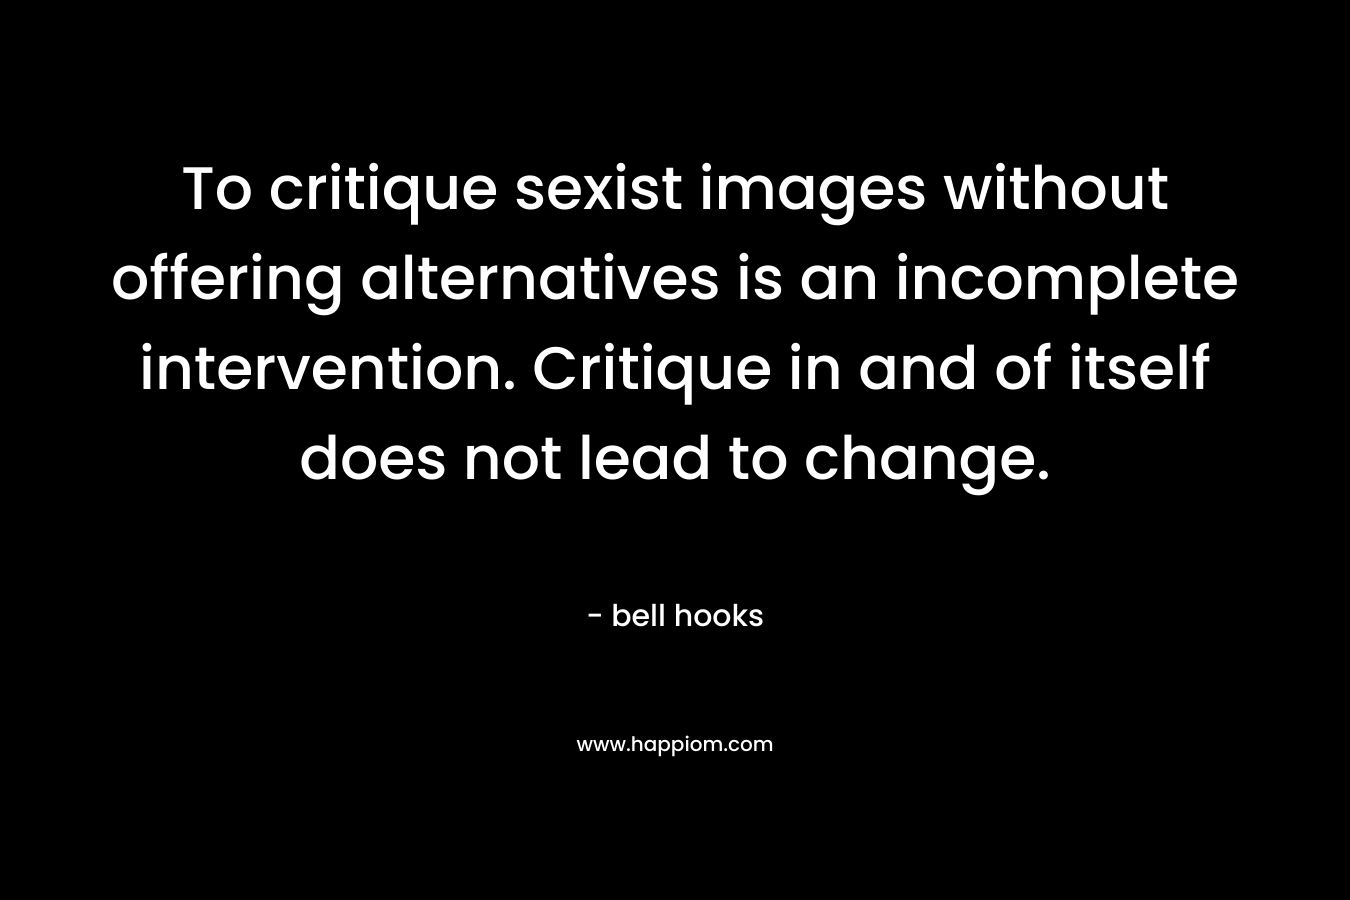 To critique sexist images without offering alternatives is an incomplete intervention. Critique in and of itself does not lead to change. – bell hooks